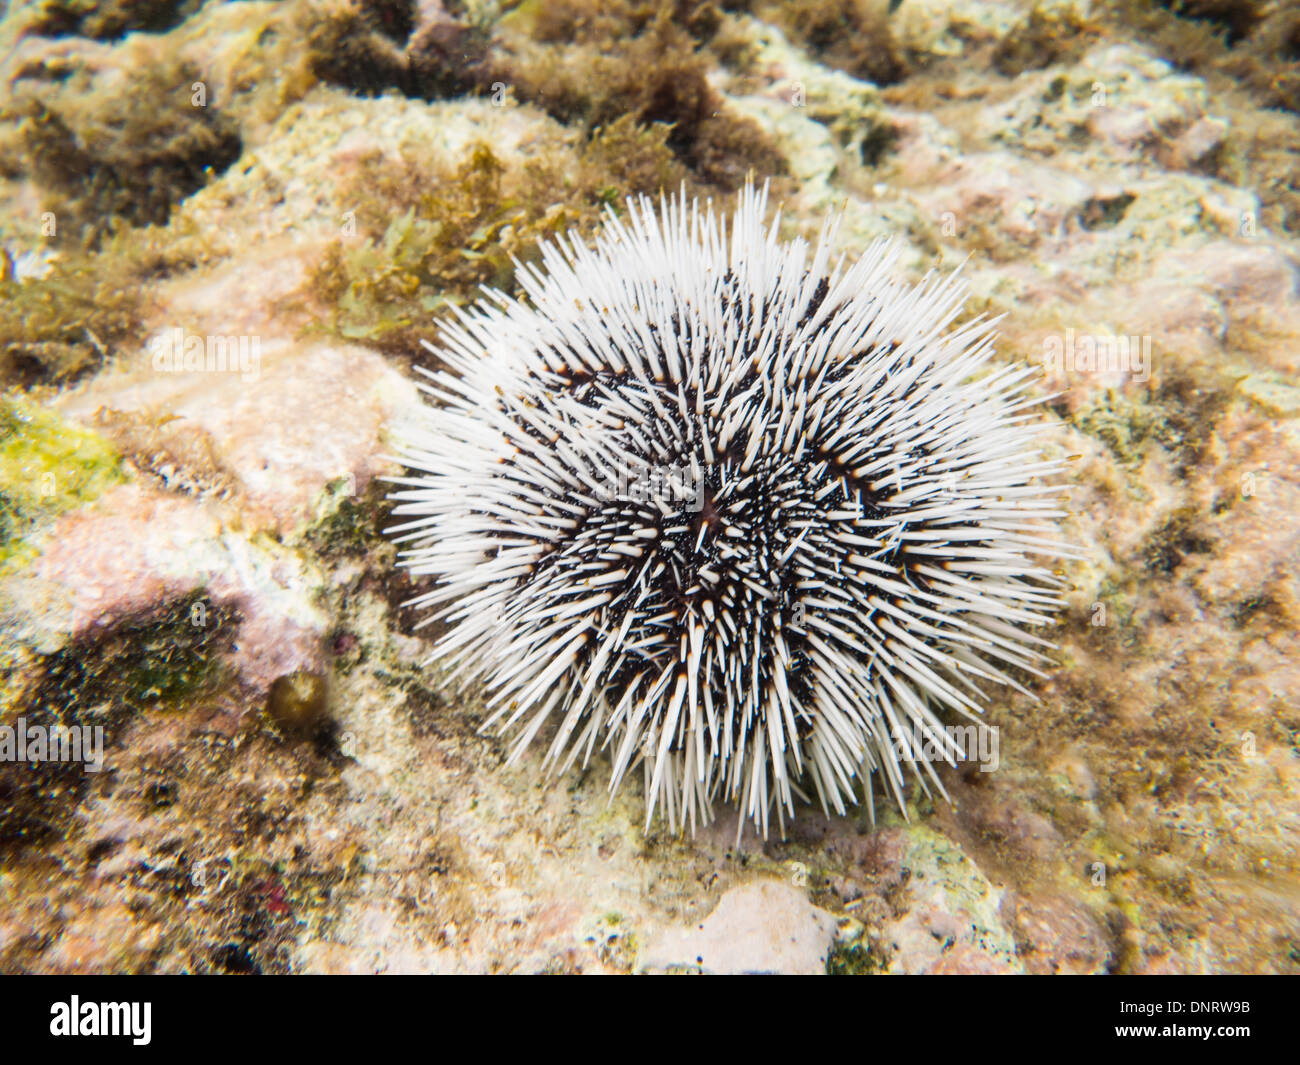 A sea Urchin underwater. Taken in the Caribbean sea off the coast of Curacao. Stock Photo